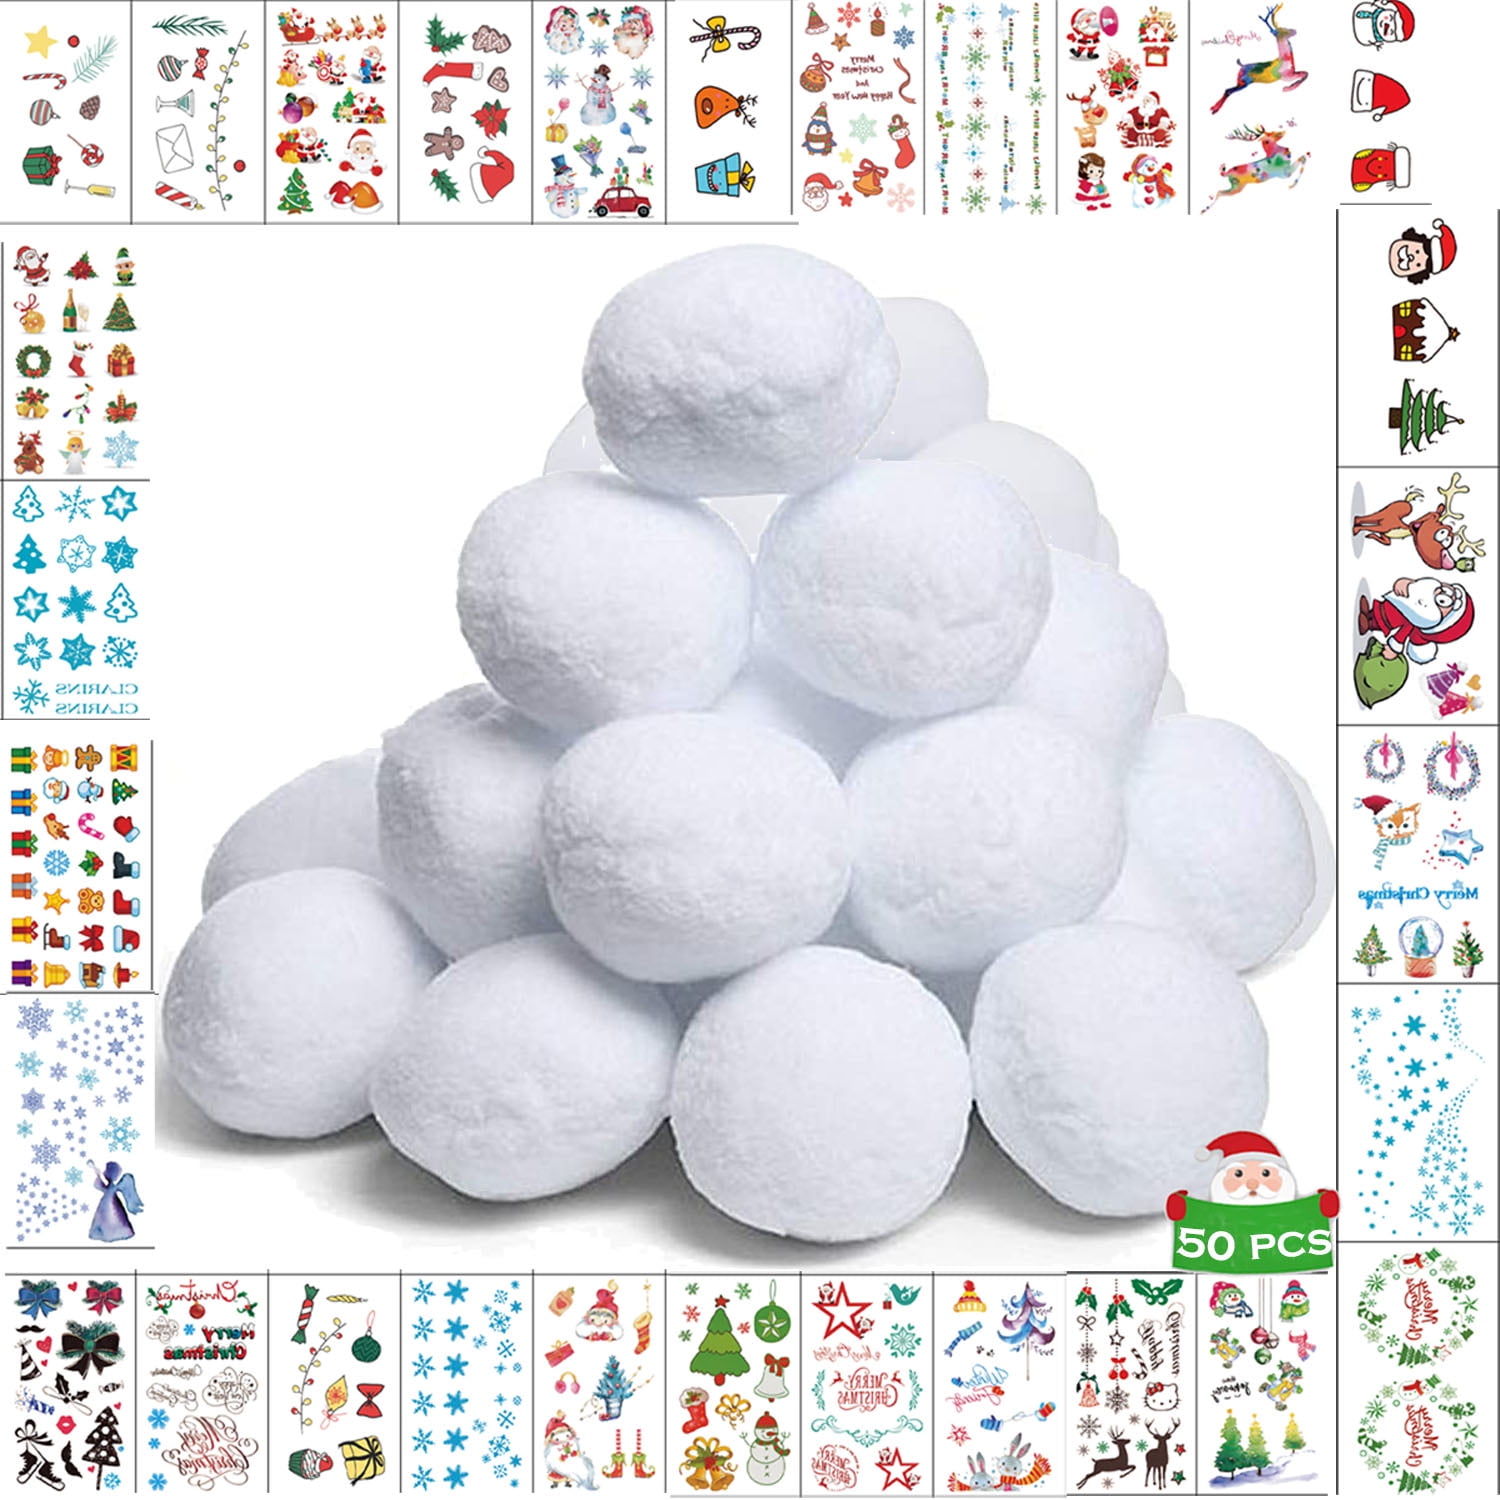 NimJoy 20 Pack 3 inch White Plush Indoor Snowballs W/30 PC Stickers for  Kids Snow Fight & Seasonal Home Decor